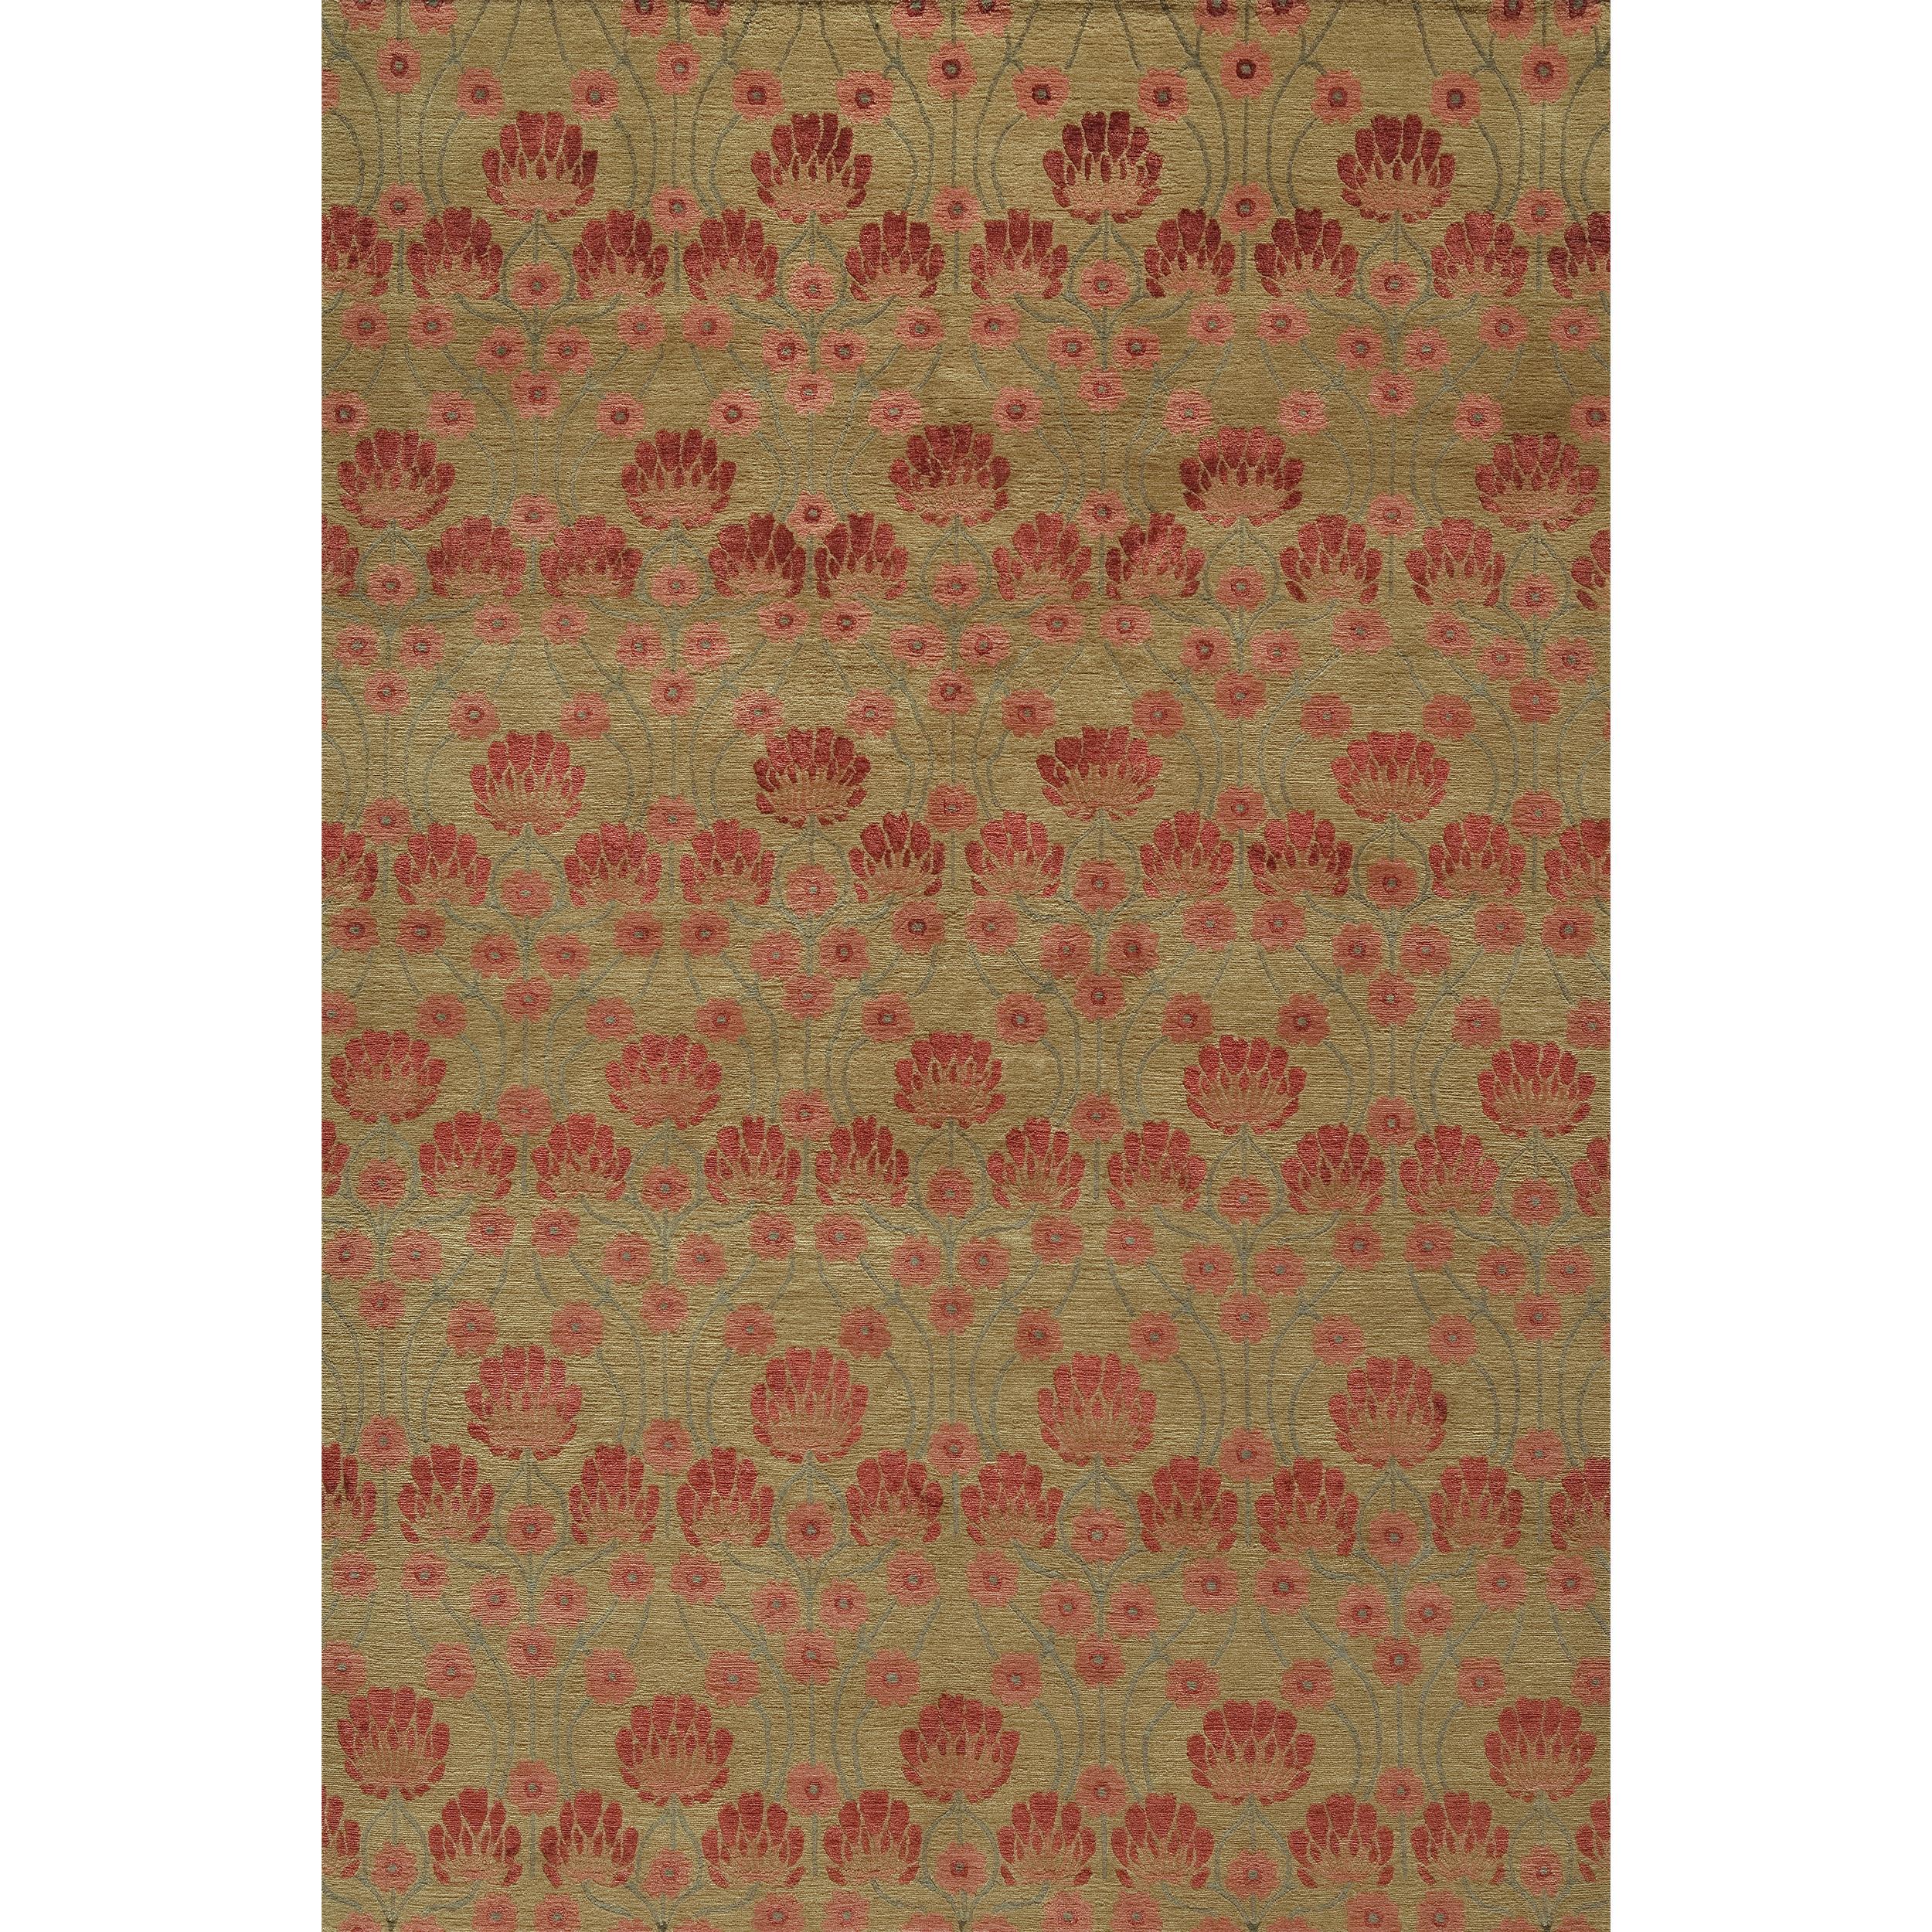 Every inch of this rug is a labor of love, meticulously hand-knotted by skilled artisans in Nepal. The design reflects a modern, abstract motif, which gracefully merges with timeless aesthetics. It blends traditional craftsmanship with contemporary